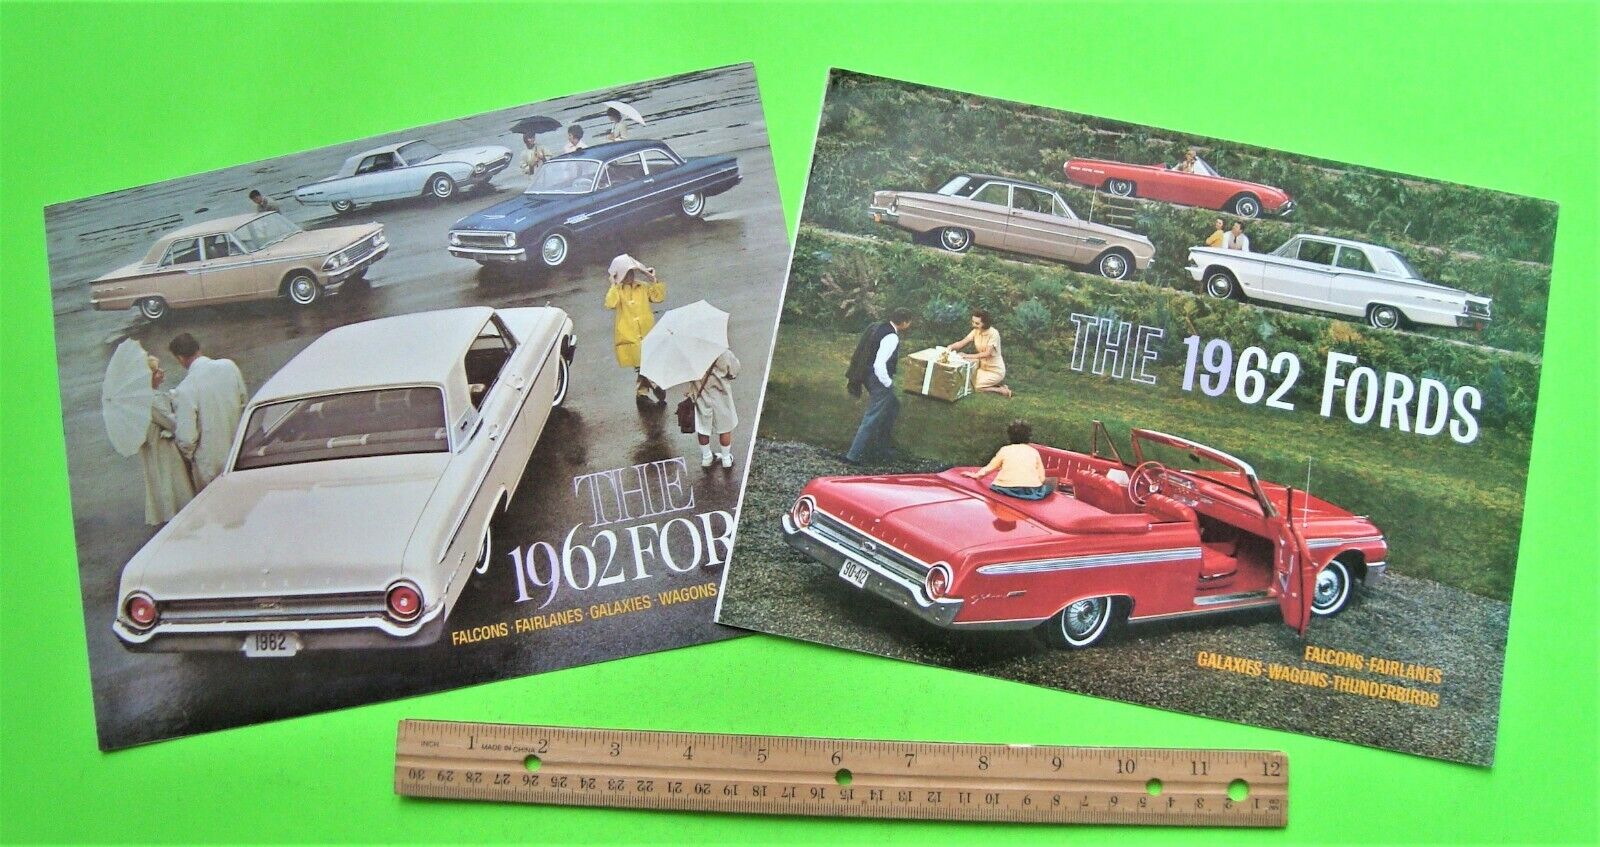 2 Diff 1962 FORD FULL LINE COLOR BROCHURES Falcon GALAXIE Wagons T-BIRD Xlnt+